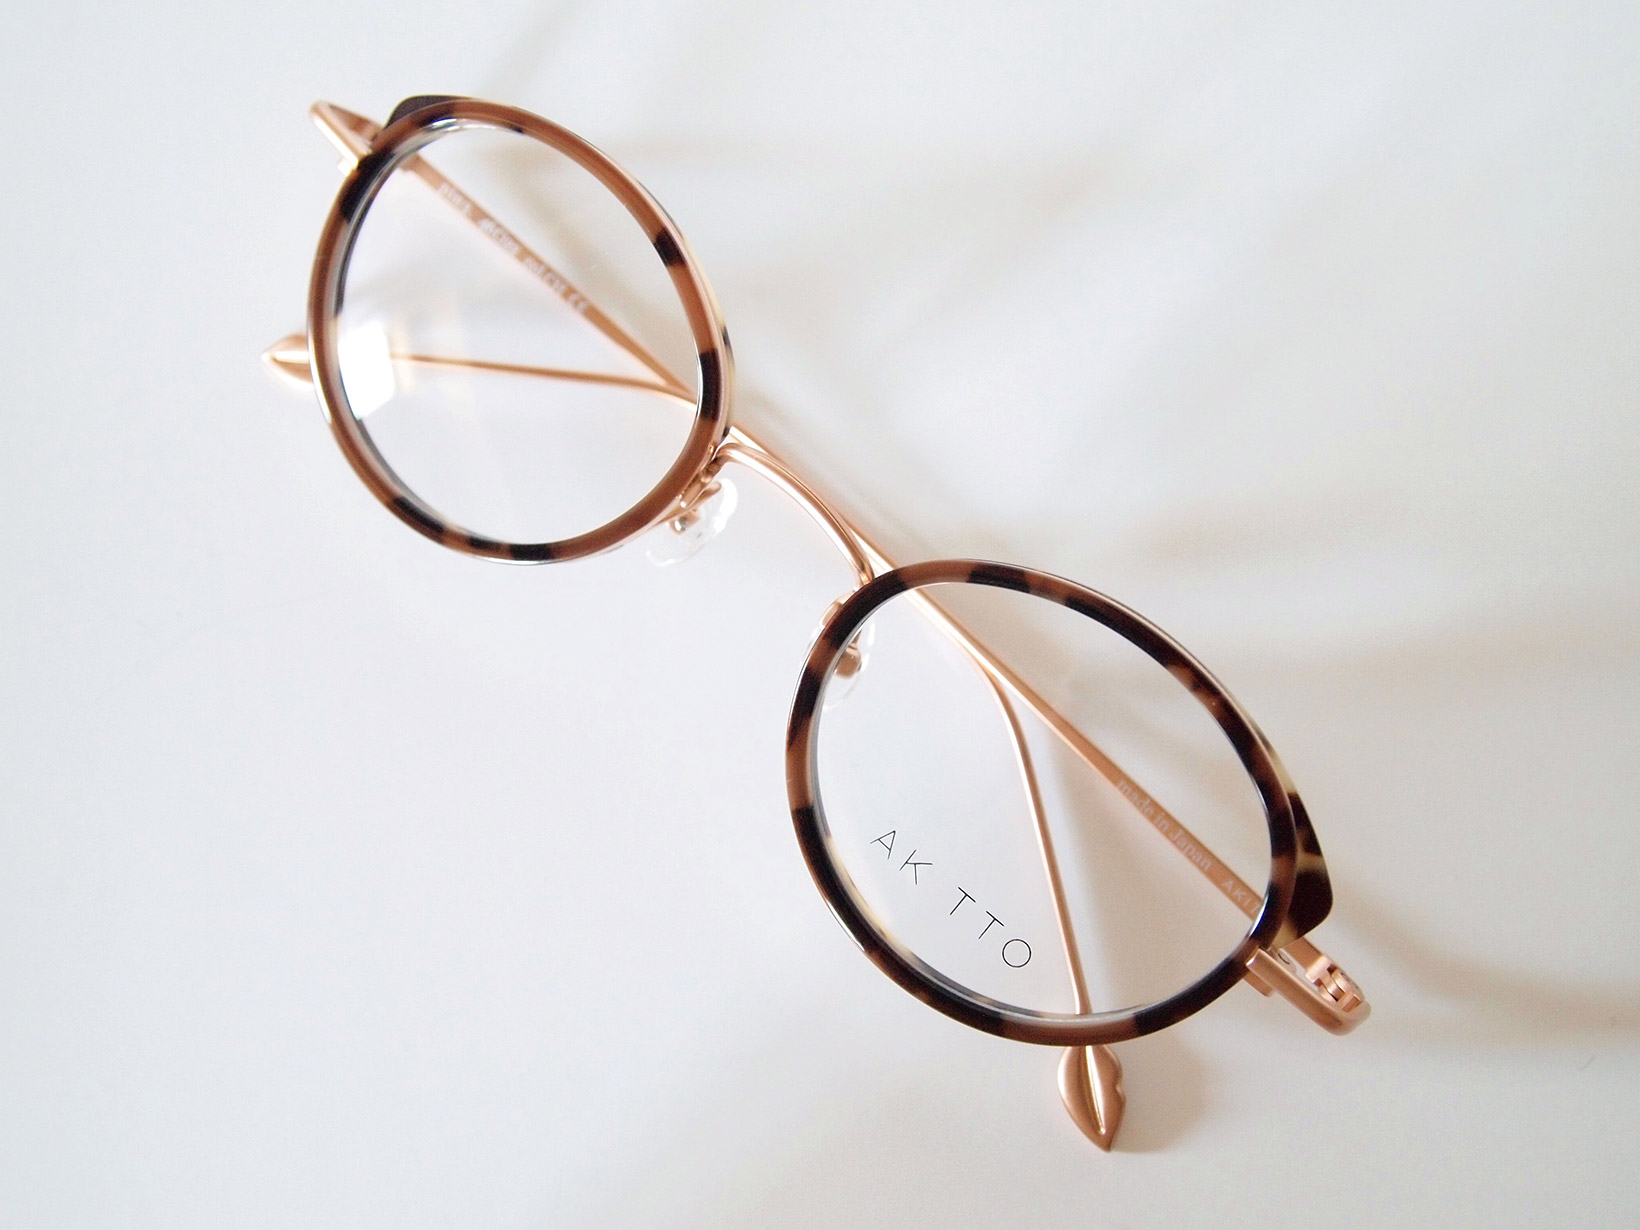 AKITTO 2018-1st pin3 color｜CH size:46□22 material:titanium+acetate price:42,000-(＋tax)